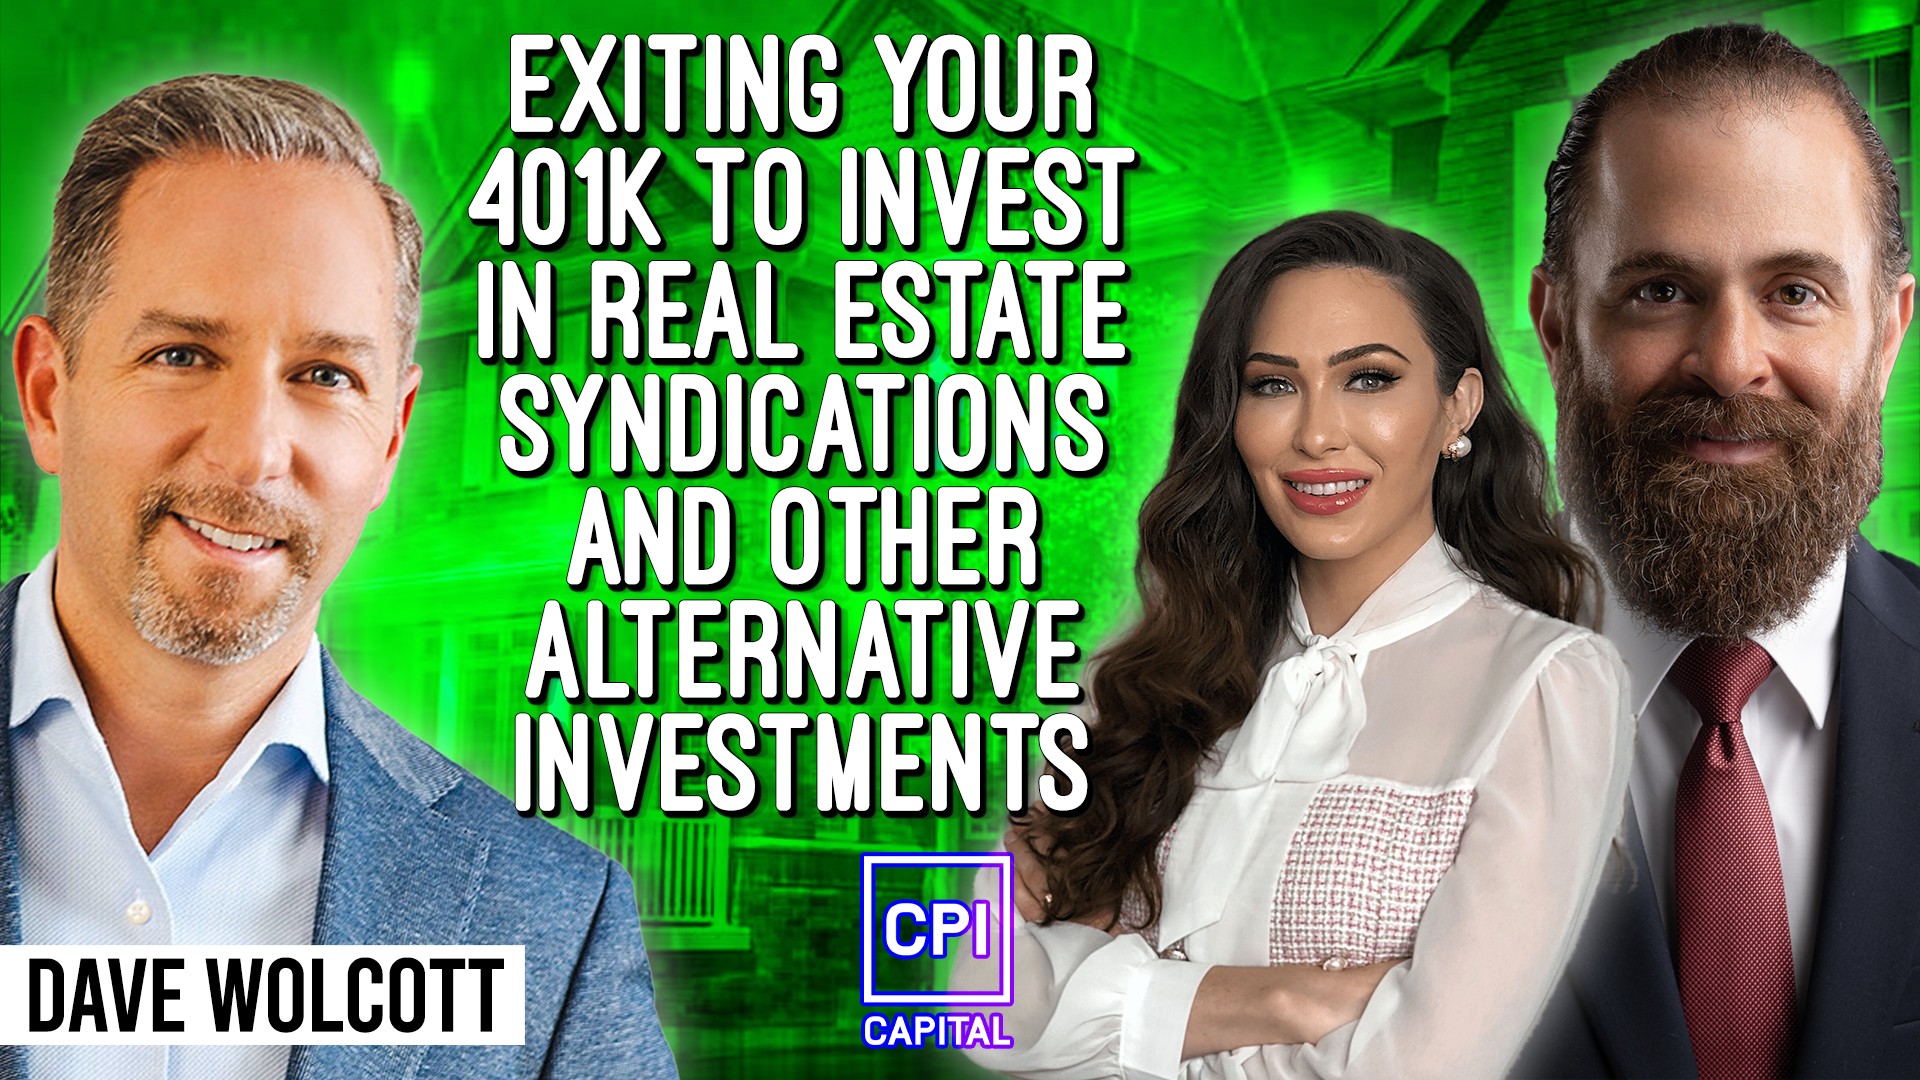 REID Dave Wolcott | Exiting Your 401k